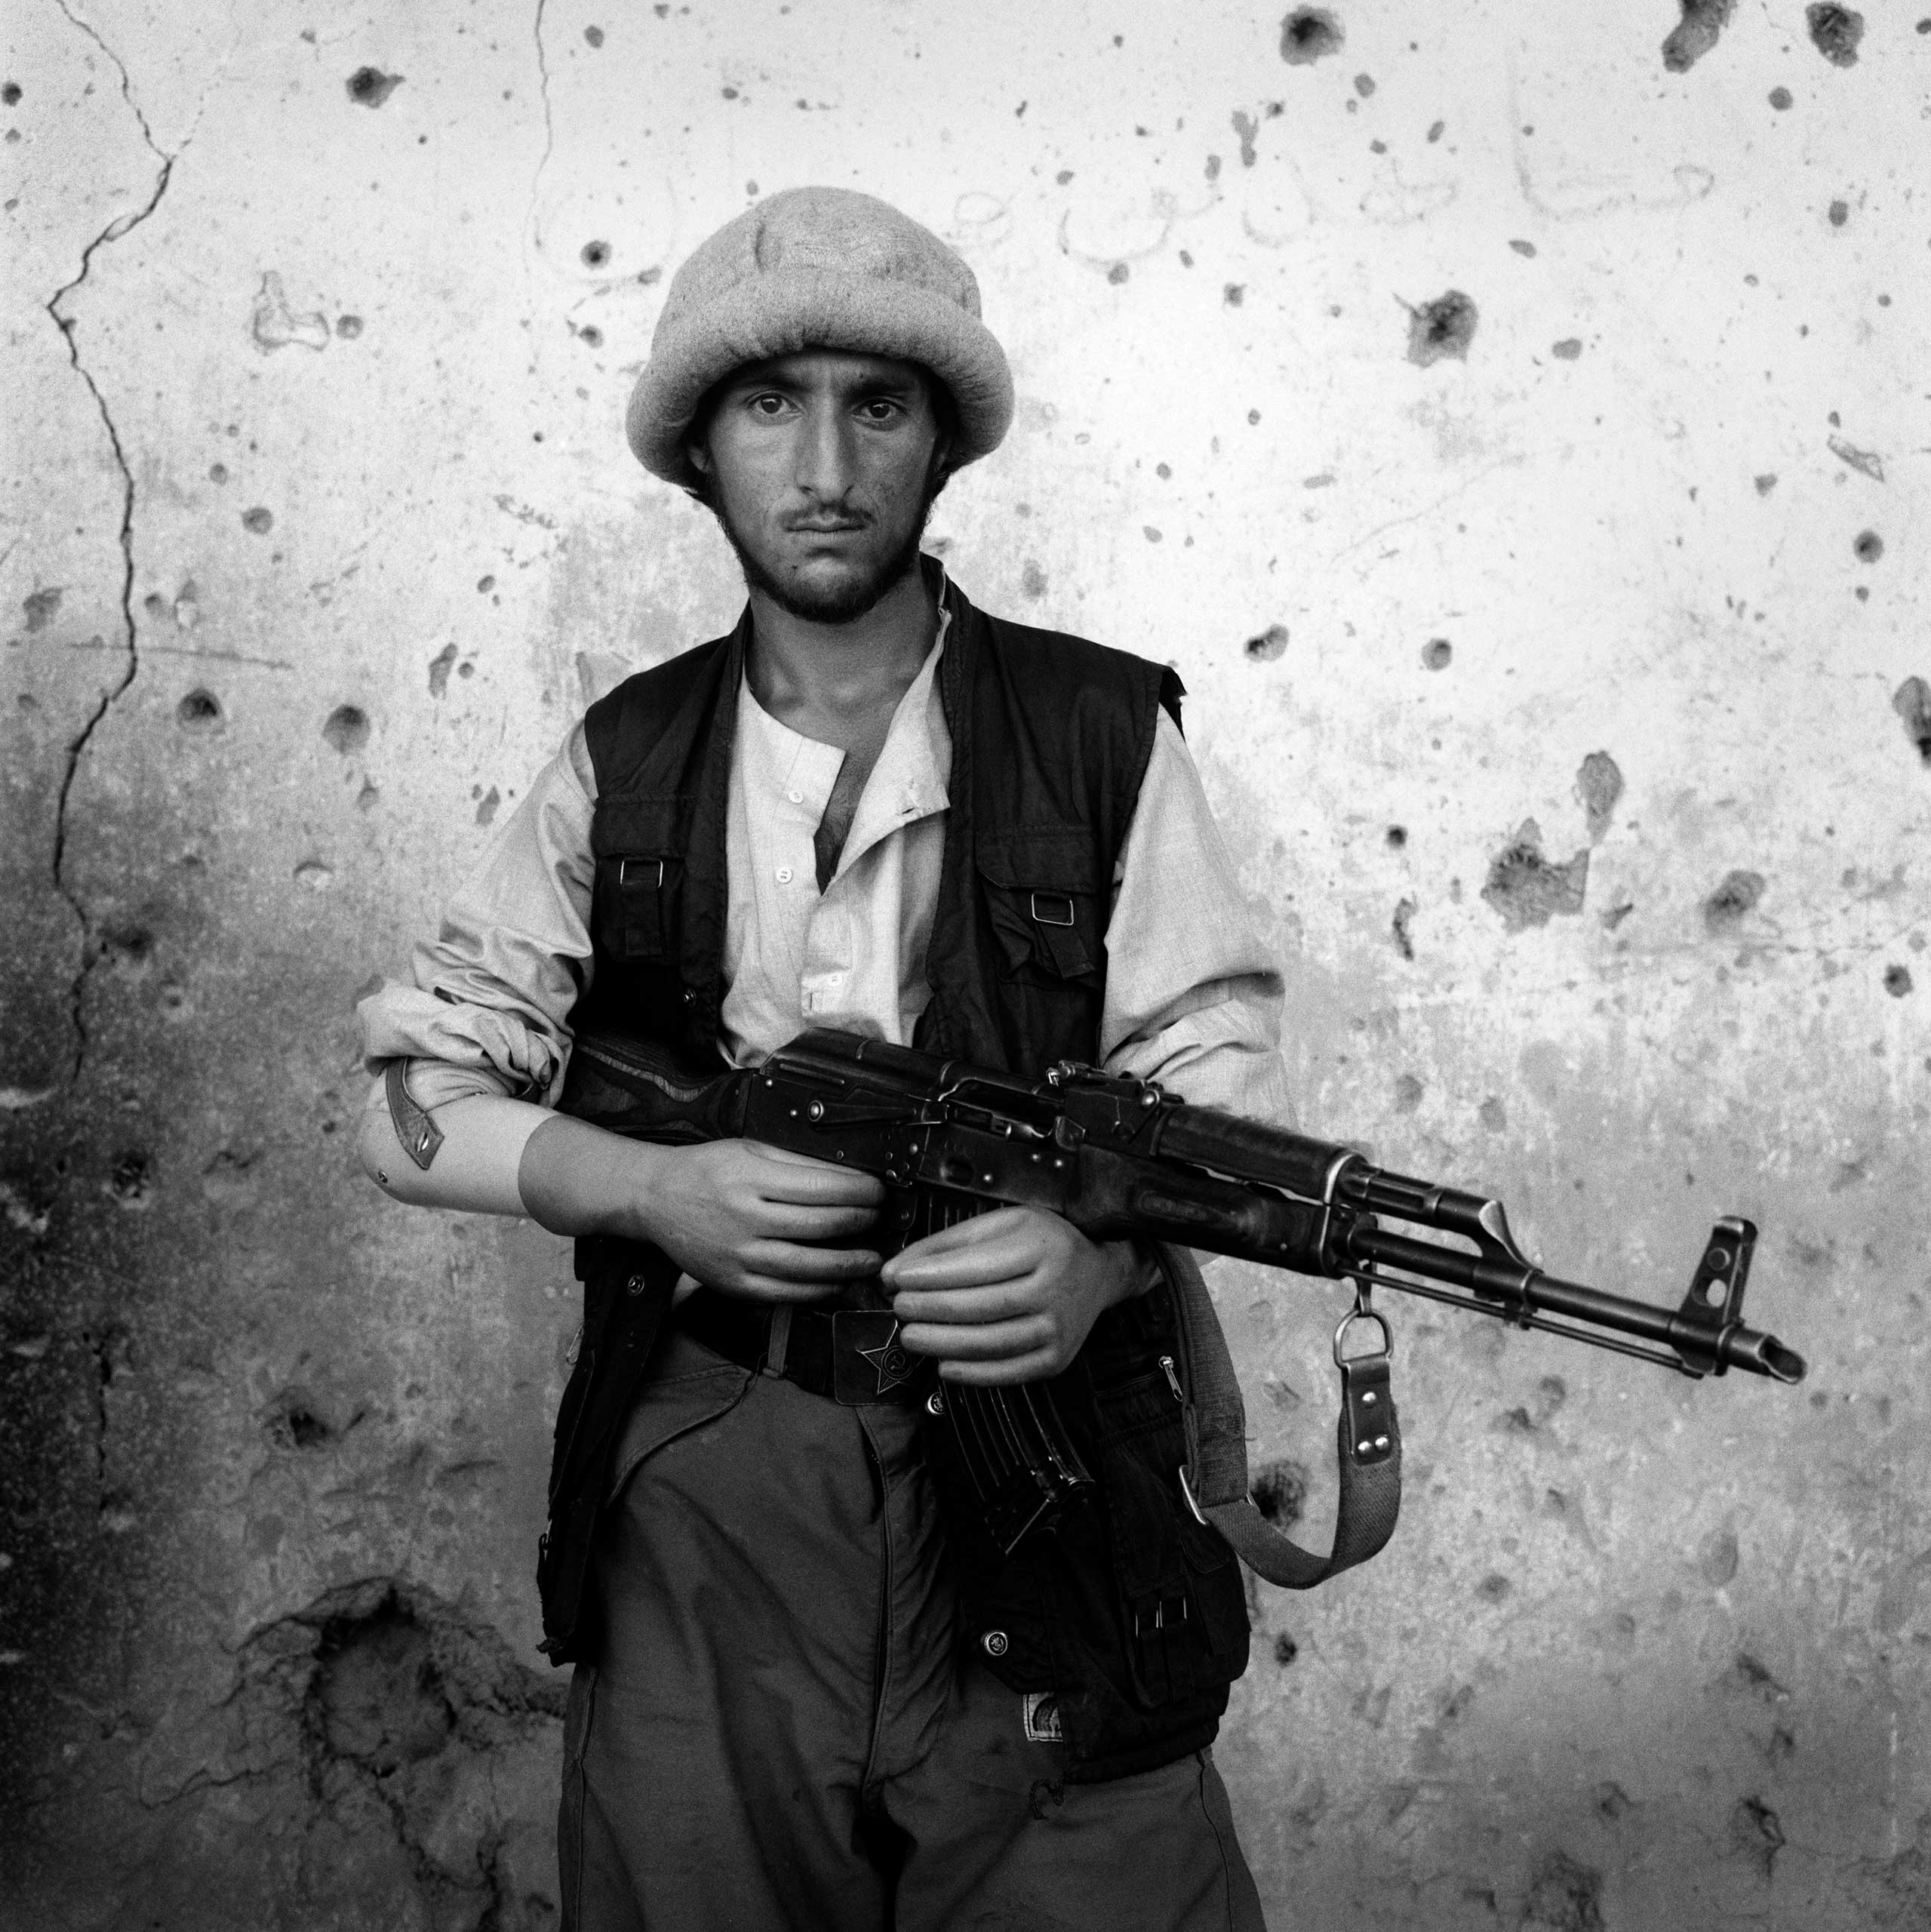 Amputee Northern Alliance soldier on frontline at Bagram Airbase, Afghanistan, 1998.